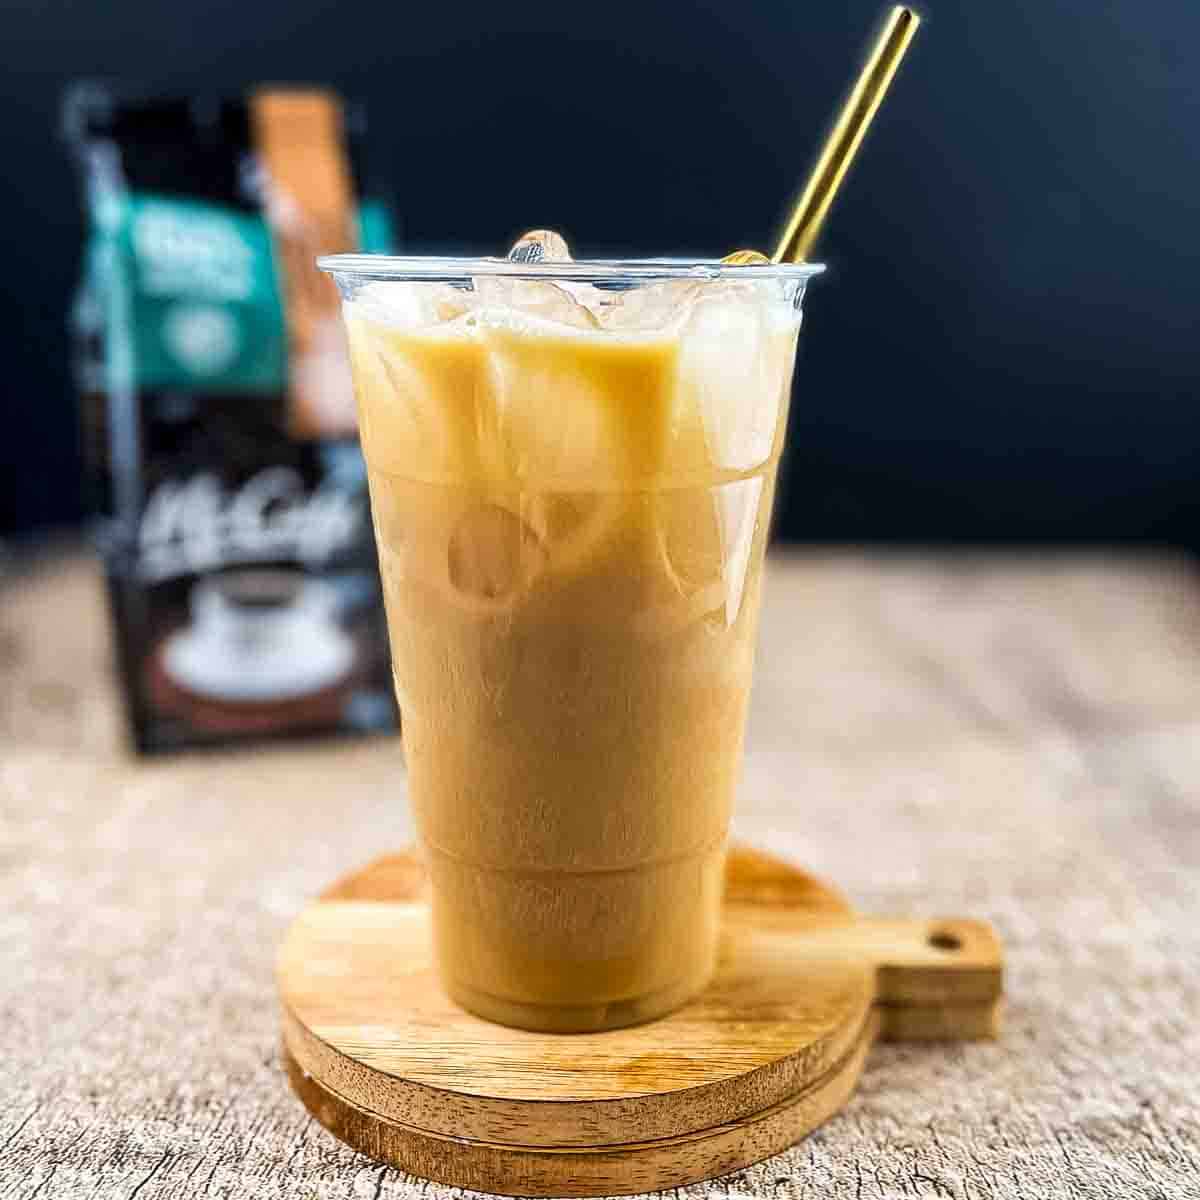 A tall glass of McDonalds iced coffee copycat recipe with a gold straw.